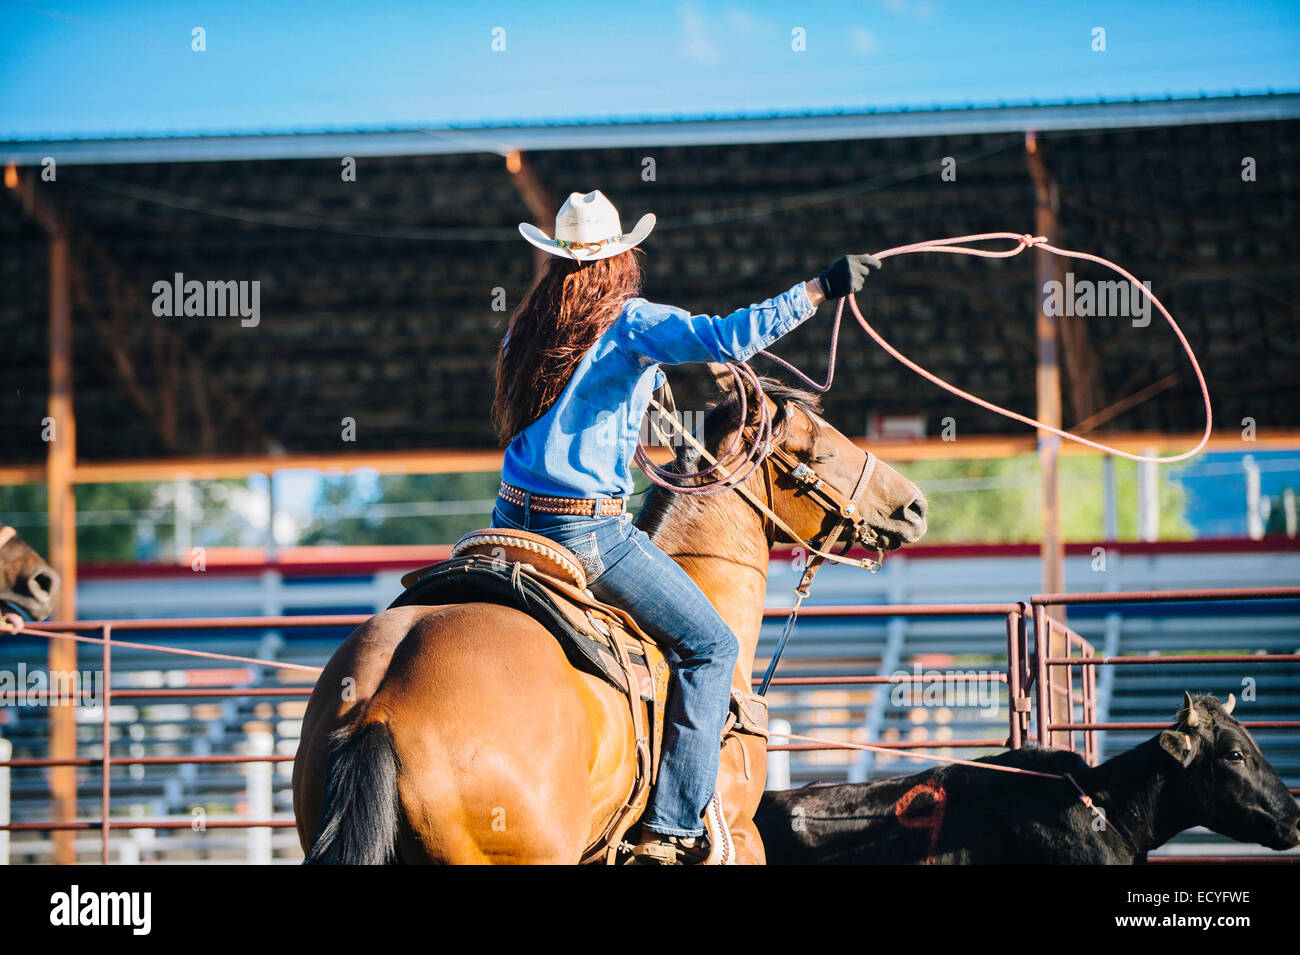 Caucasian cowgirl on horse throwing lasso in rodeo on ranch Stock Photo